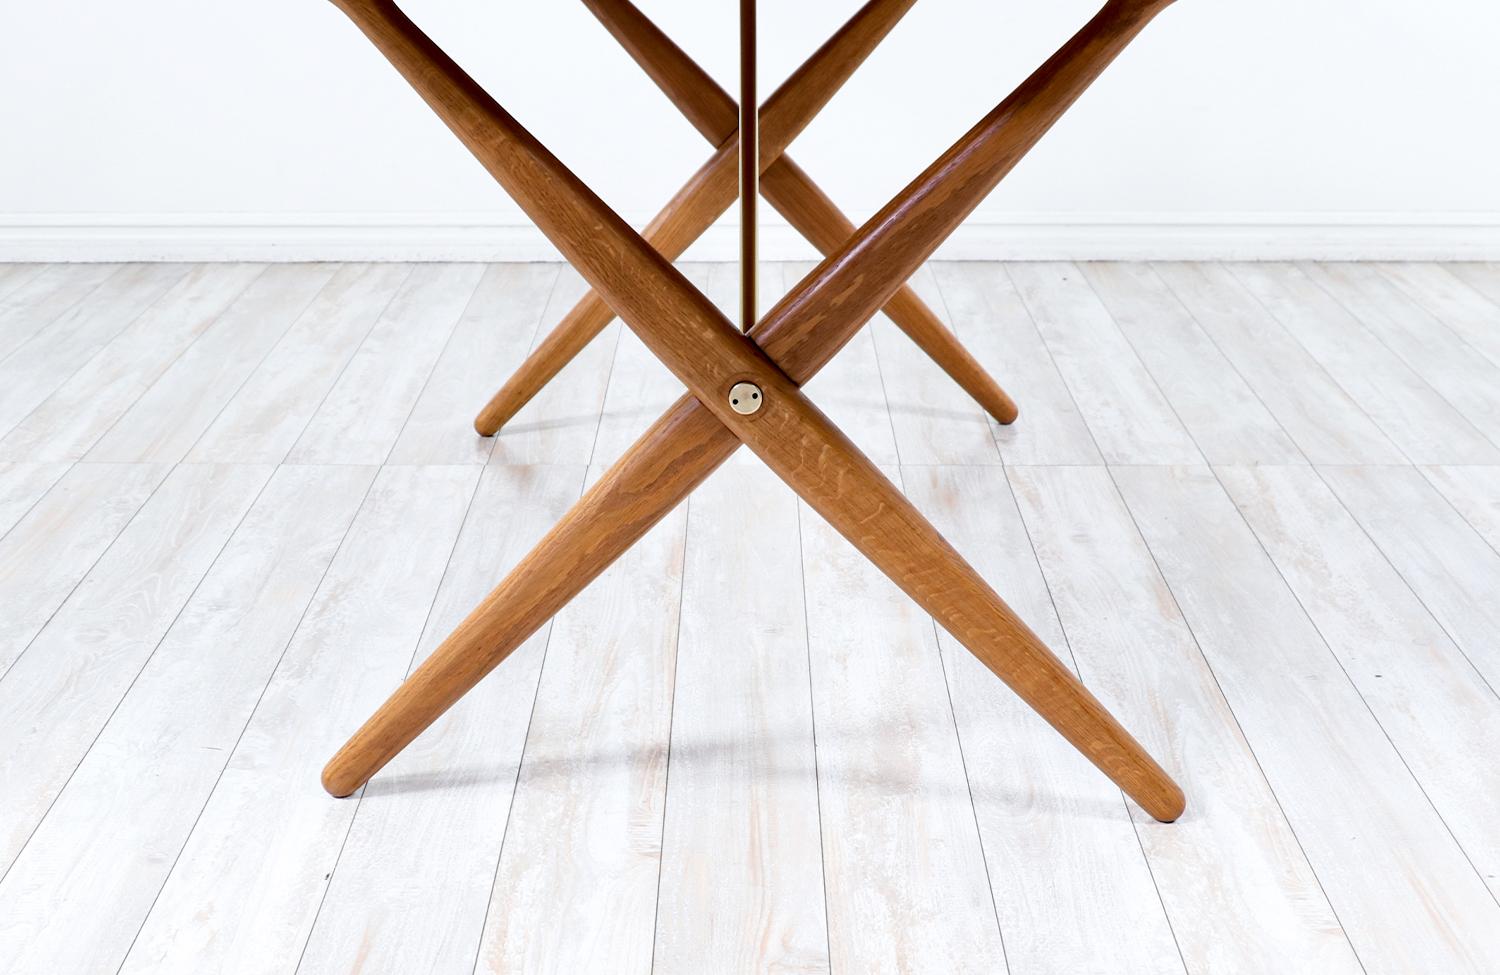 Hans J. Wegner AT-303 “Sabre” Dining Table for Andreas Tuck For Sale 3